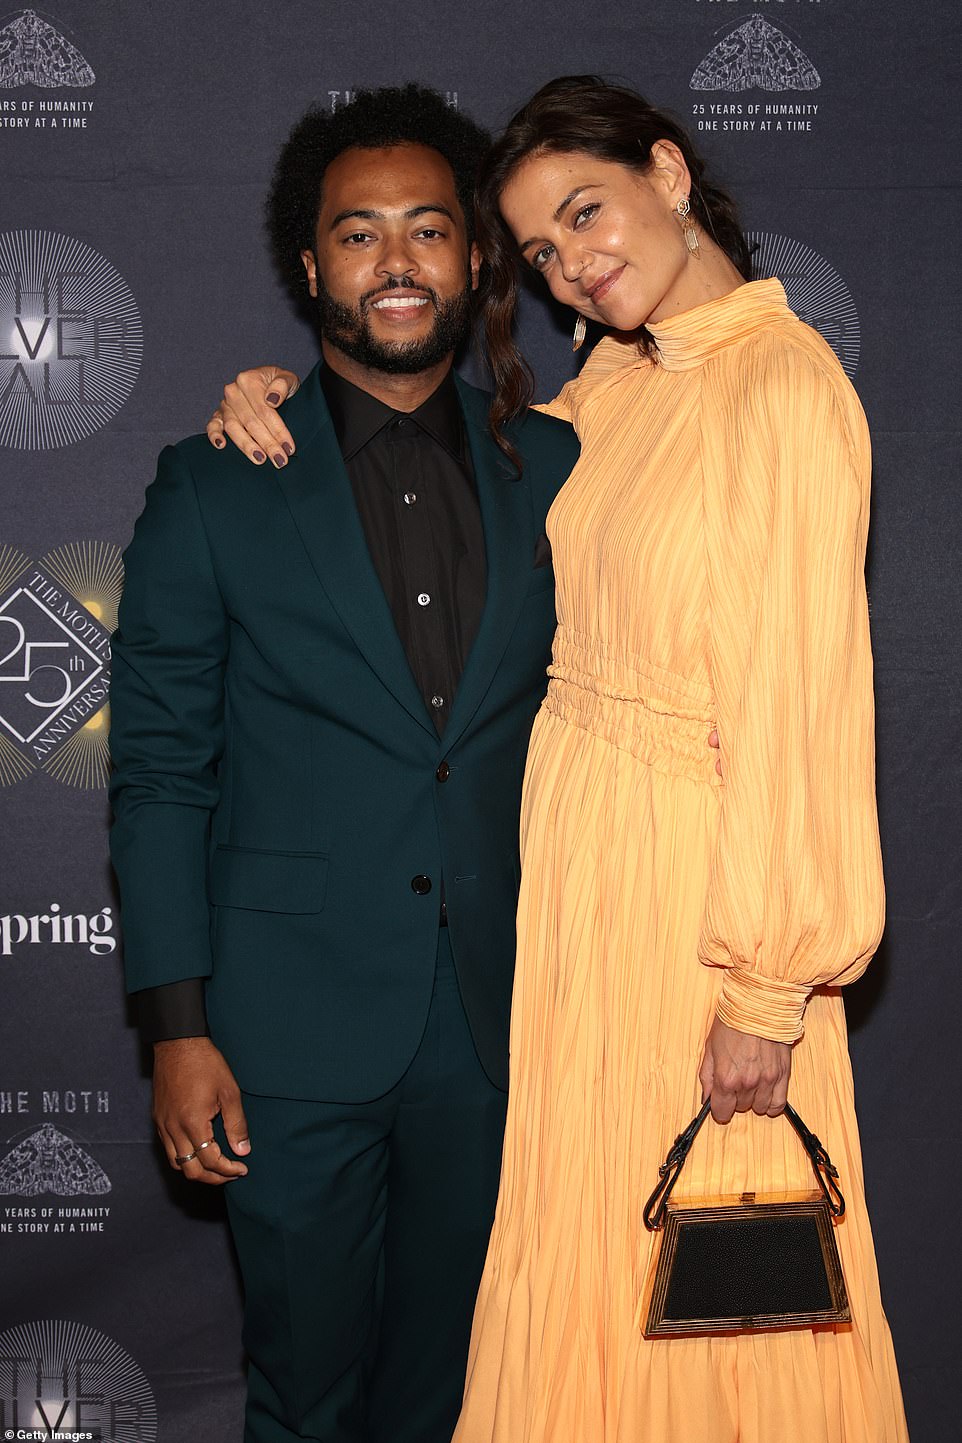 Stylish couple: The actress, 43, looked elegant in an ankle-length, peach-colored, pleated, high-necked dress, which she paired with black toe-ring heels and a chic art deco purse, while her boyfriend, 33, looked dapper in a forest green suit and black shirt